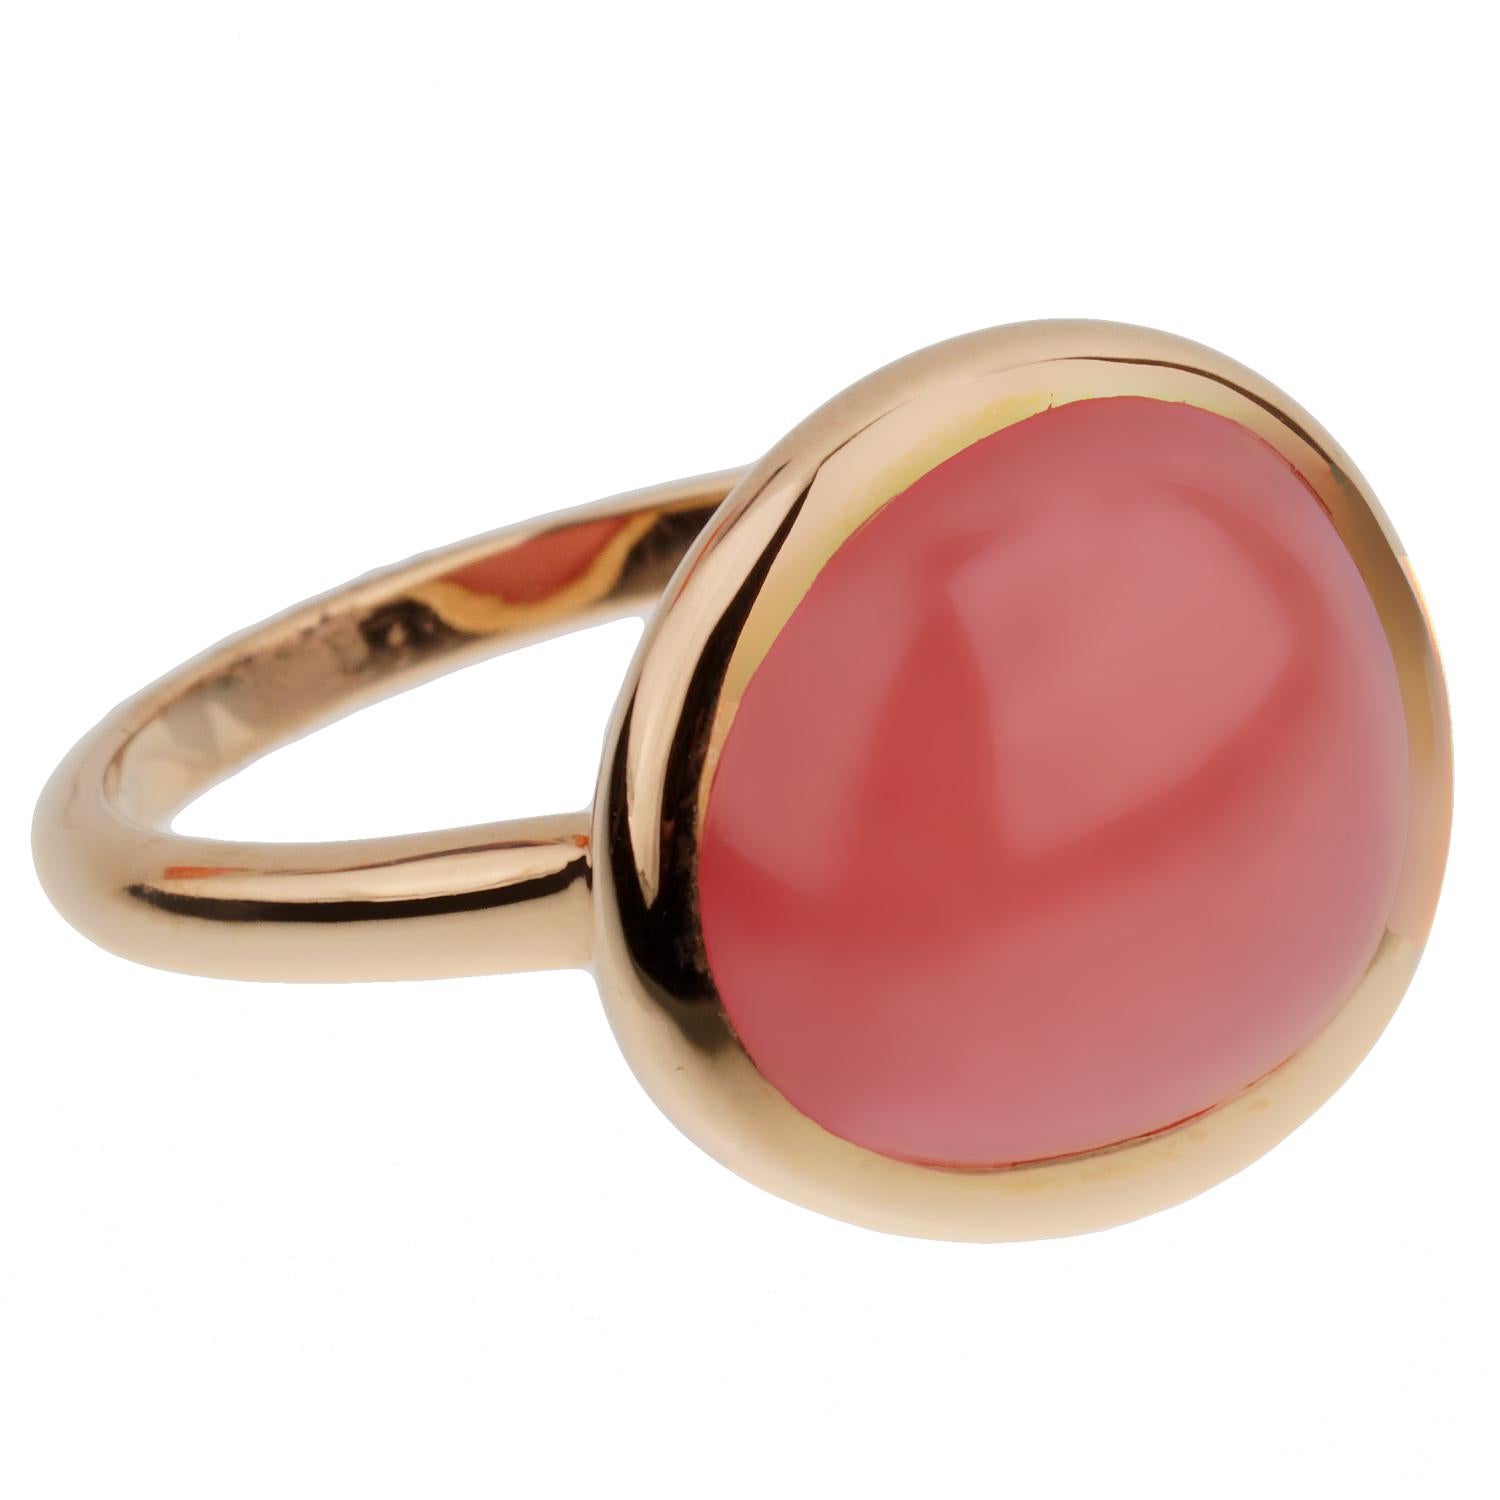 A chic Fred of Paris rose gold cocktail ring showcasing a 7ct cabochon Rhodochrosite set in 18k gold. The ring measures a size 6 1/2 and can be resized if needed.